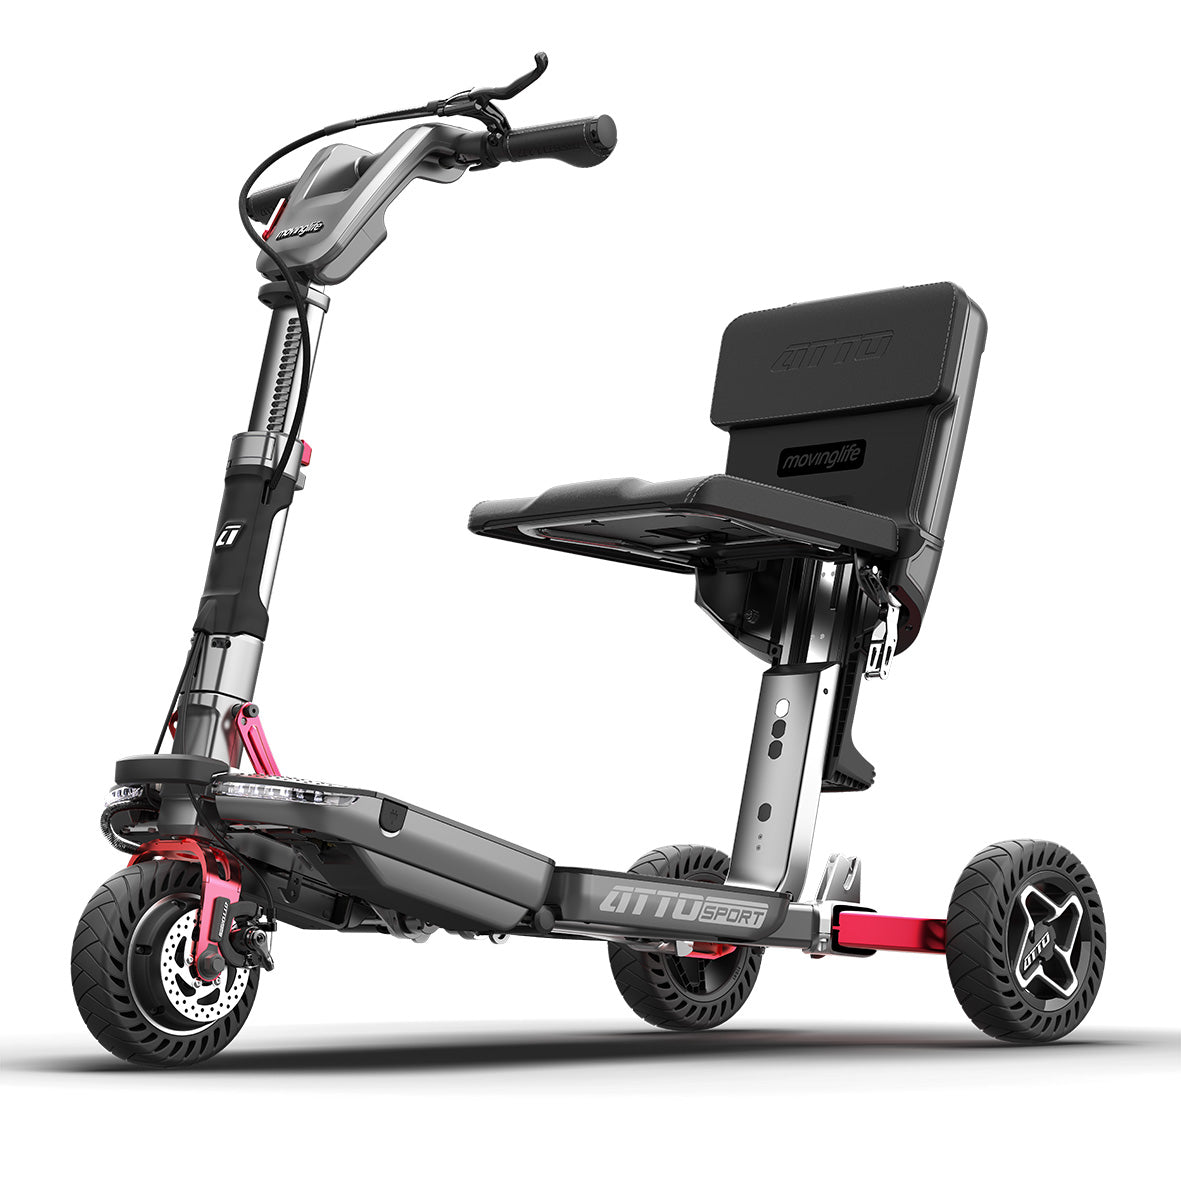 Go-Go Sport 4 Wheel Travel Scooter - Top Mobility